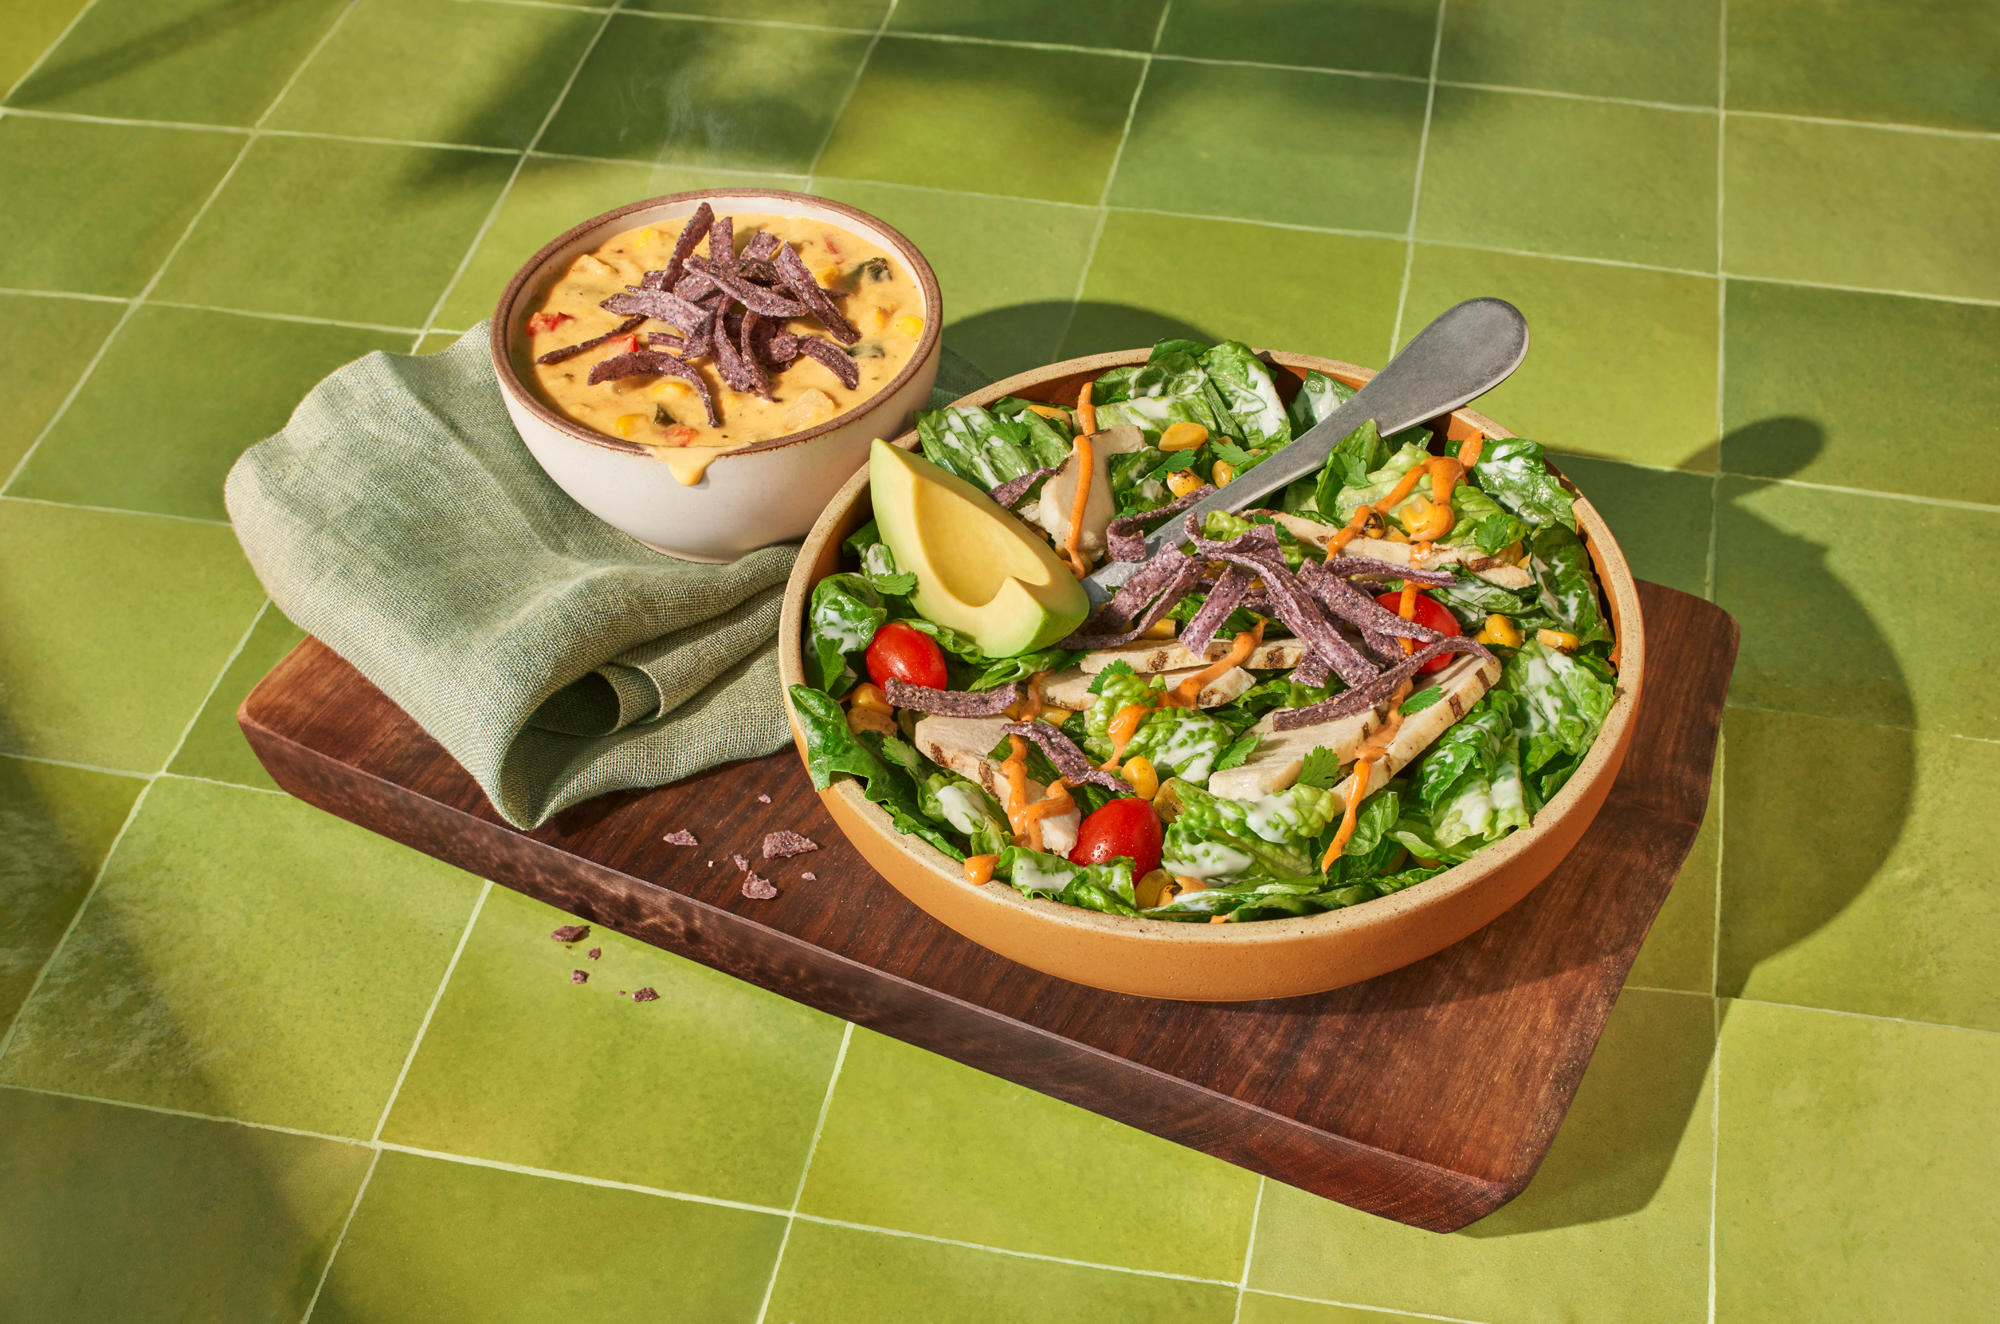 Southwest Chicken Ranch Salad & Mexican Street Corn Chowder Cup You Pick 2 Panera Bread Tracy (209)855-8014